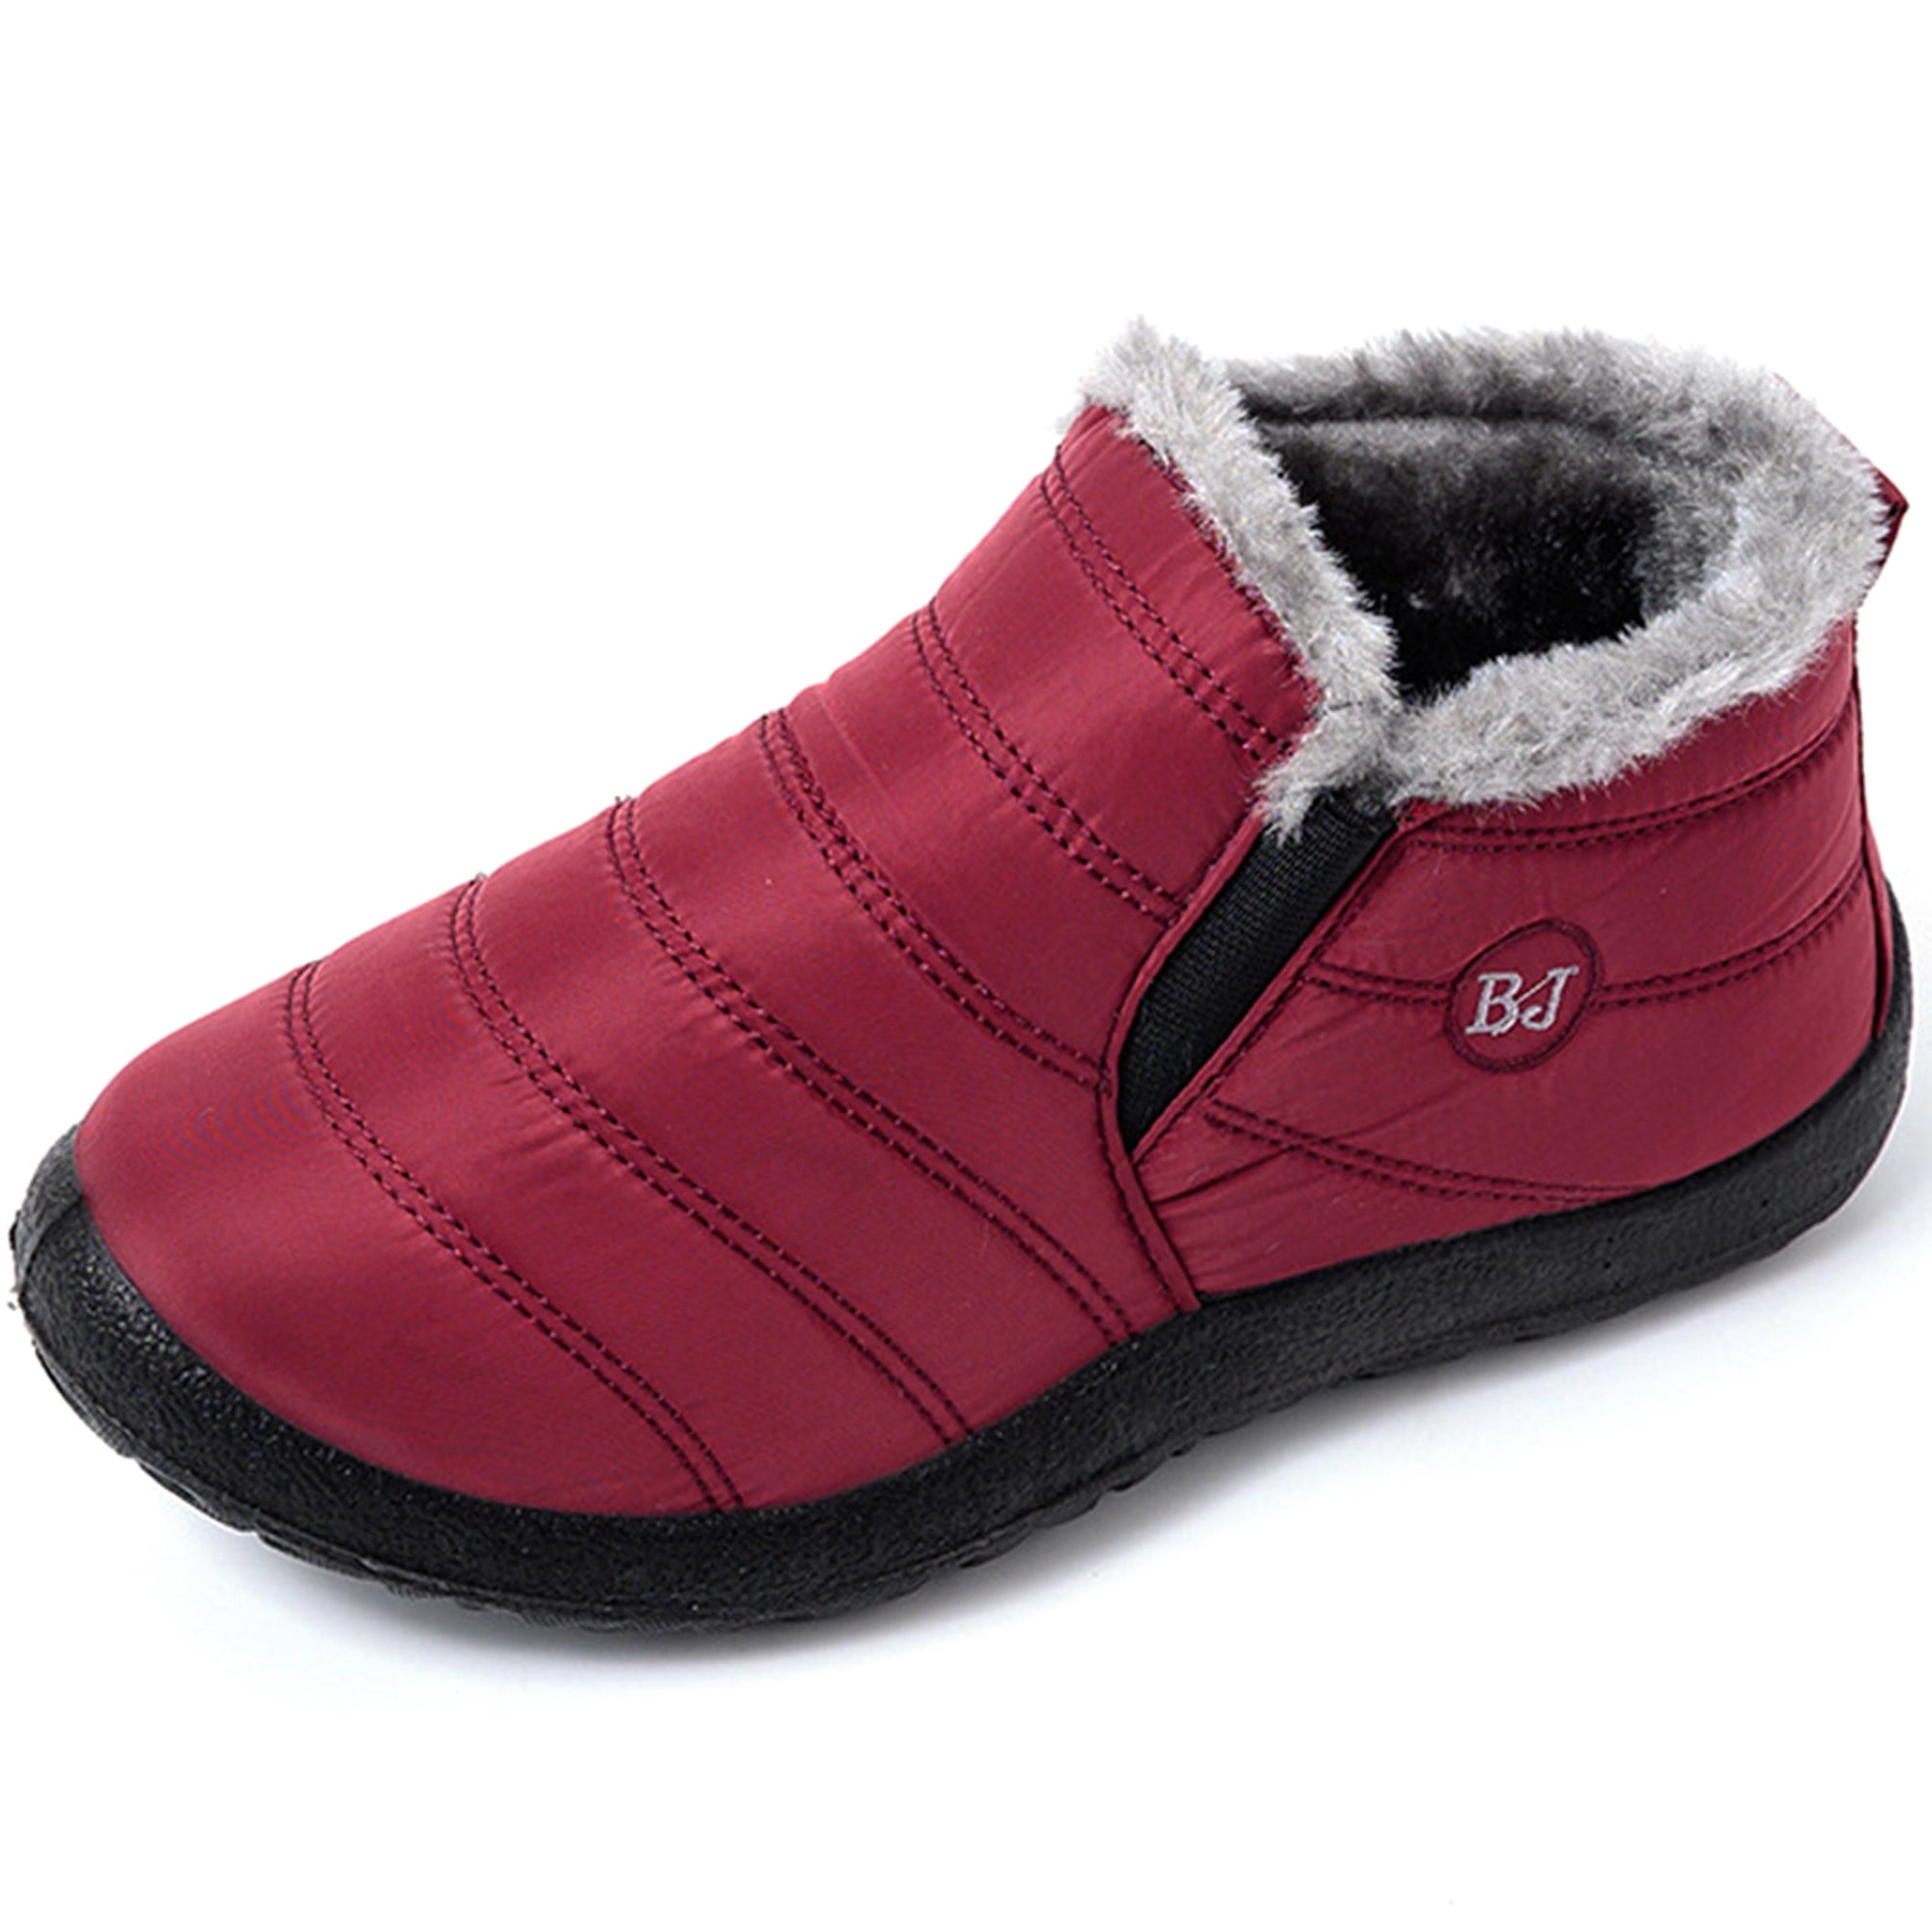 Womens Mens Winter Snow Waterproof Boots Fur Lined Flat Ankle Outdoor Walking Warm Shoes 